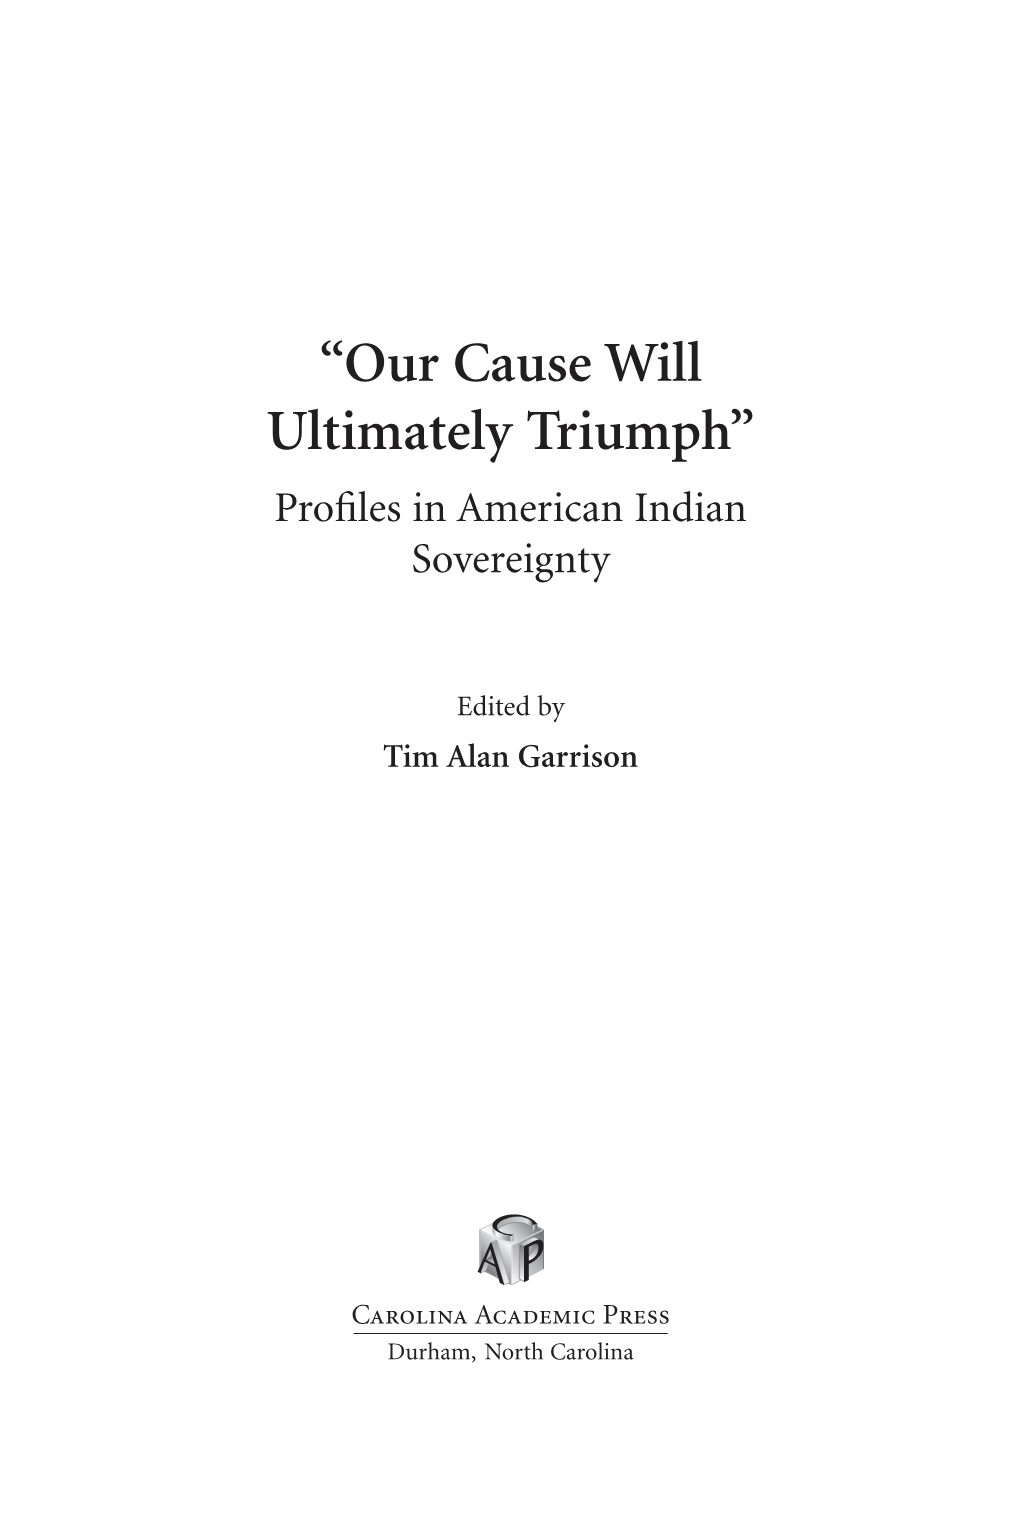 “Our Cause Will Ultimately Triumph” Proﬁles in American Indian Sovereignty